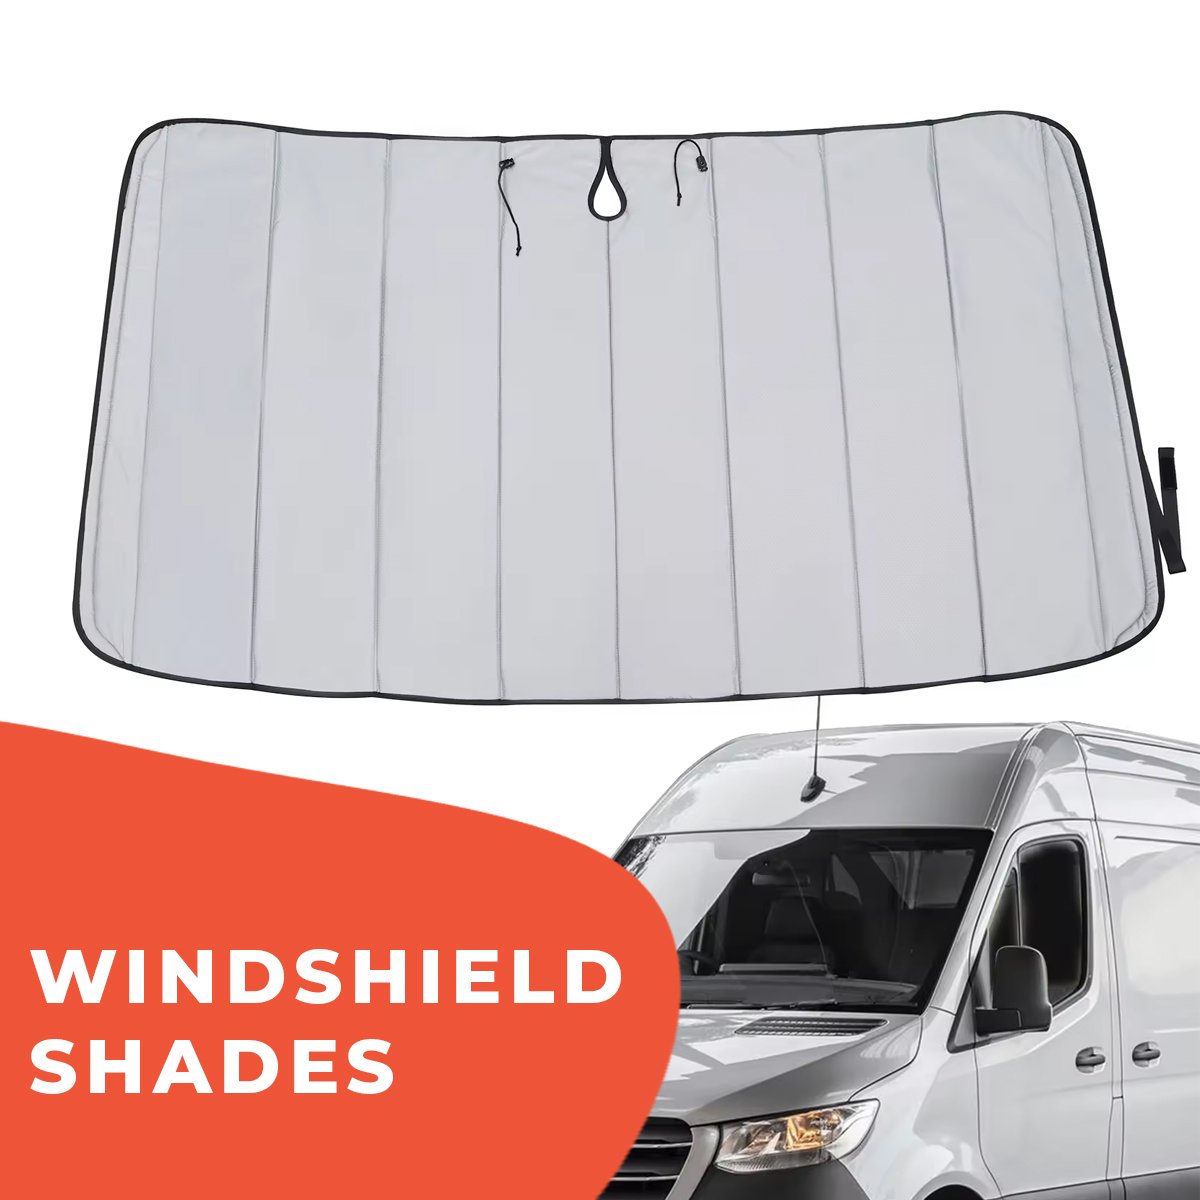 Windshield-Shades-Product-Images-1.jpg